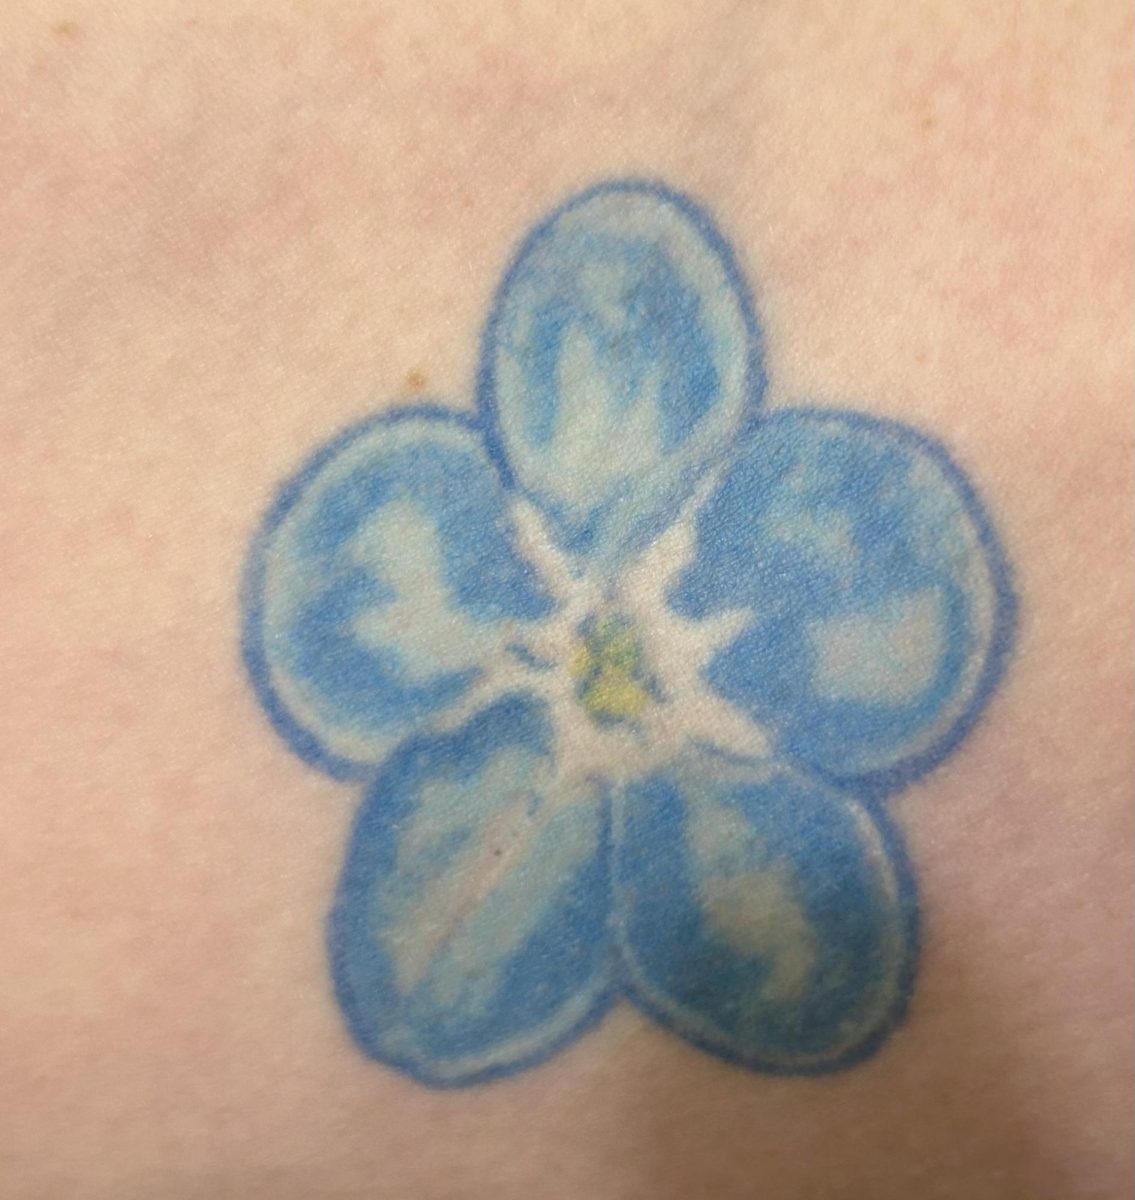 A+picture+taken+by+Brooke+Crigger+herself+of+the+forget-me-not+that+represents+her+grandmother.+In+the+future%2C+shes+going+to+get+more+flower+tattoos+to+memorialize+different+members+of+her+family.